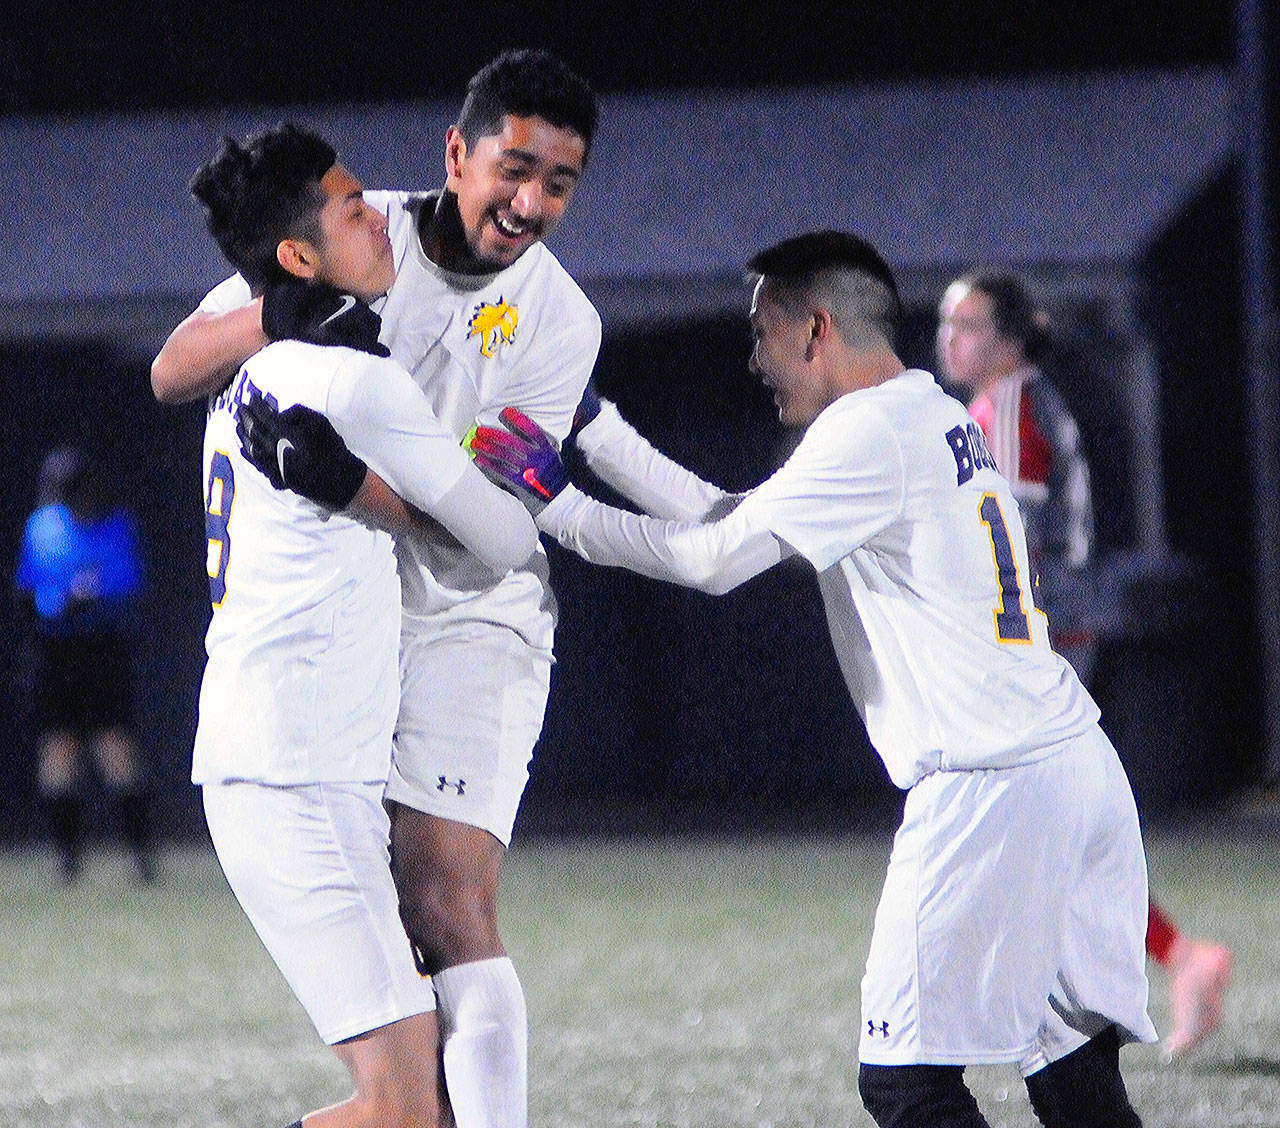 Aberdeen’s Hulizes Chavez, middle, celebrates with teammates Christian Sanchez, right, and Miguel Martinez after Chavez’s goal in the 53rd minute. (Hasani Grayson | Grays Harbor News Group)